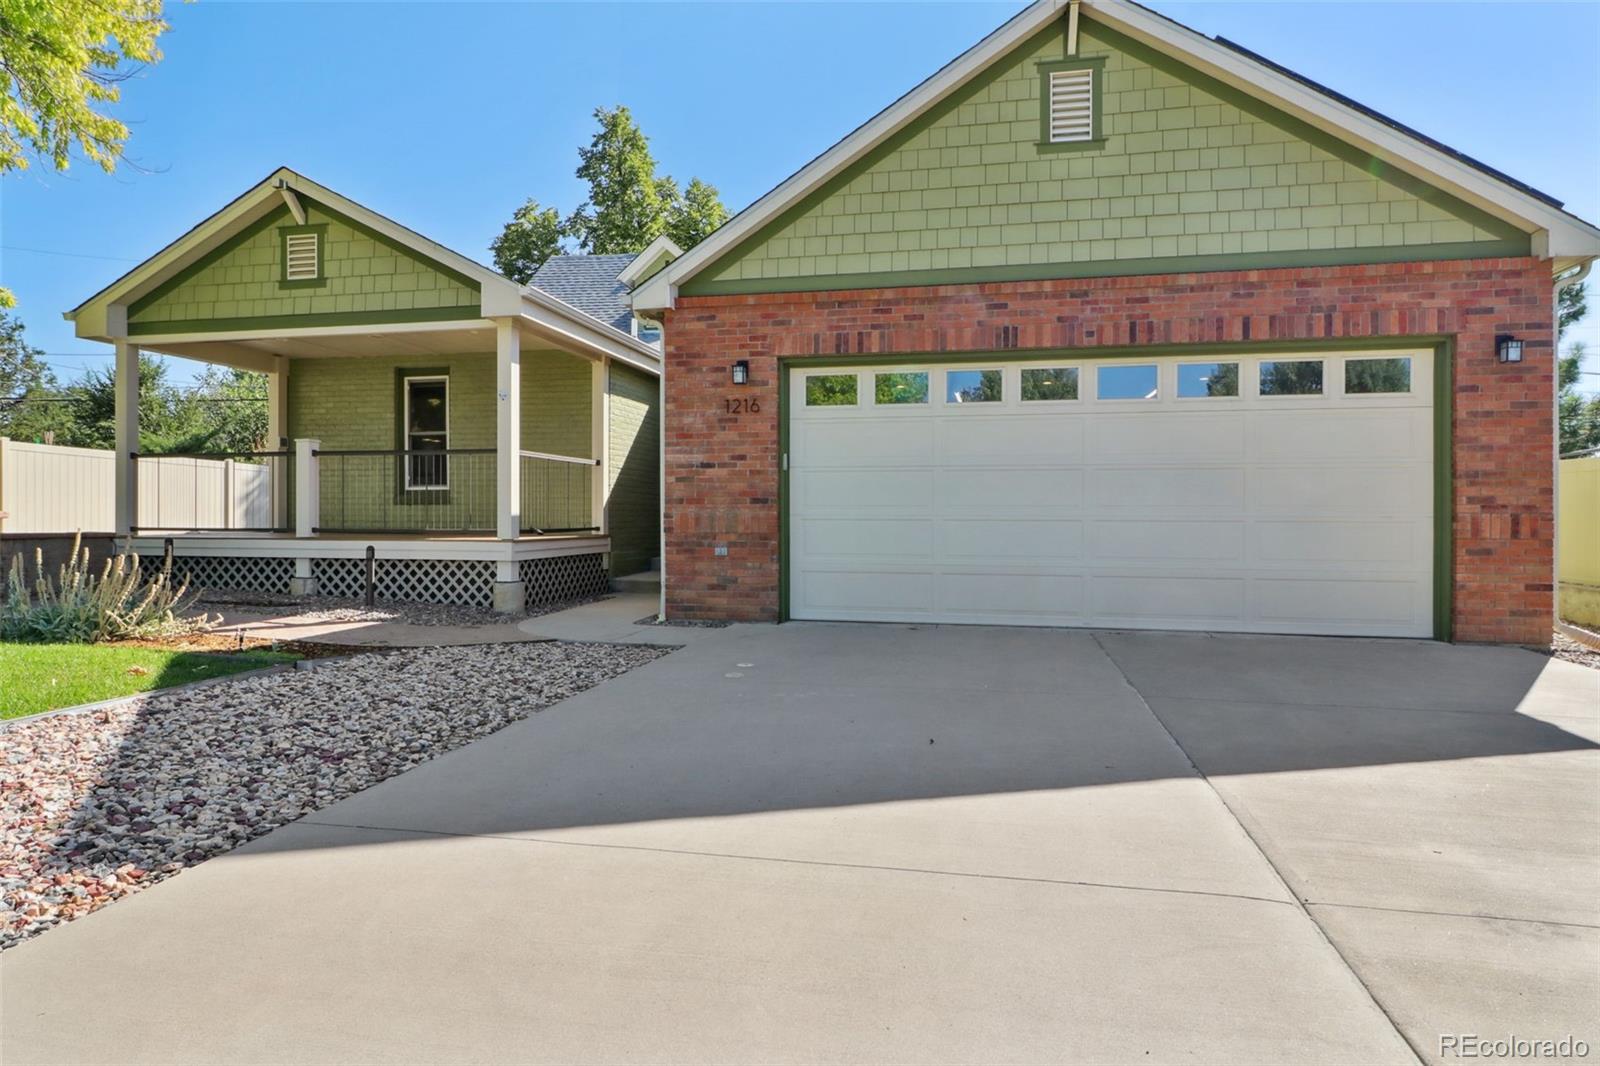 1216  quince street, denver sold home. Closed on 2023-12-29 for $524,750.